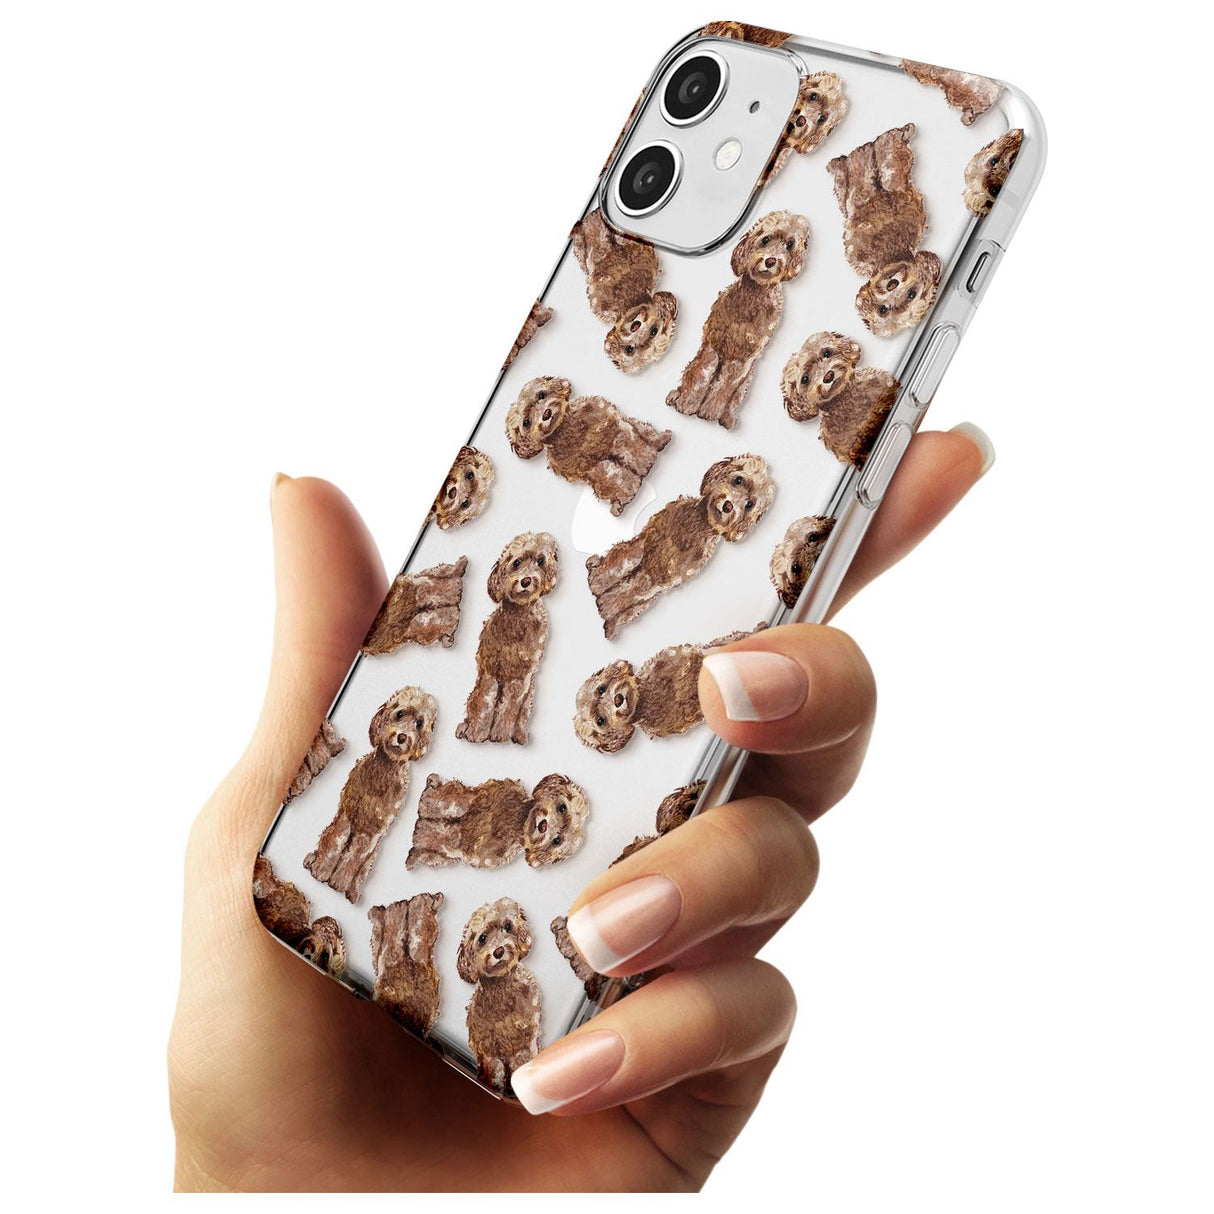 Cockapoo (Brown) Watercolour Dog Pattern Slim TPU Phone Case for iPhone 11